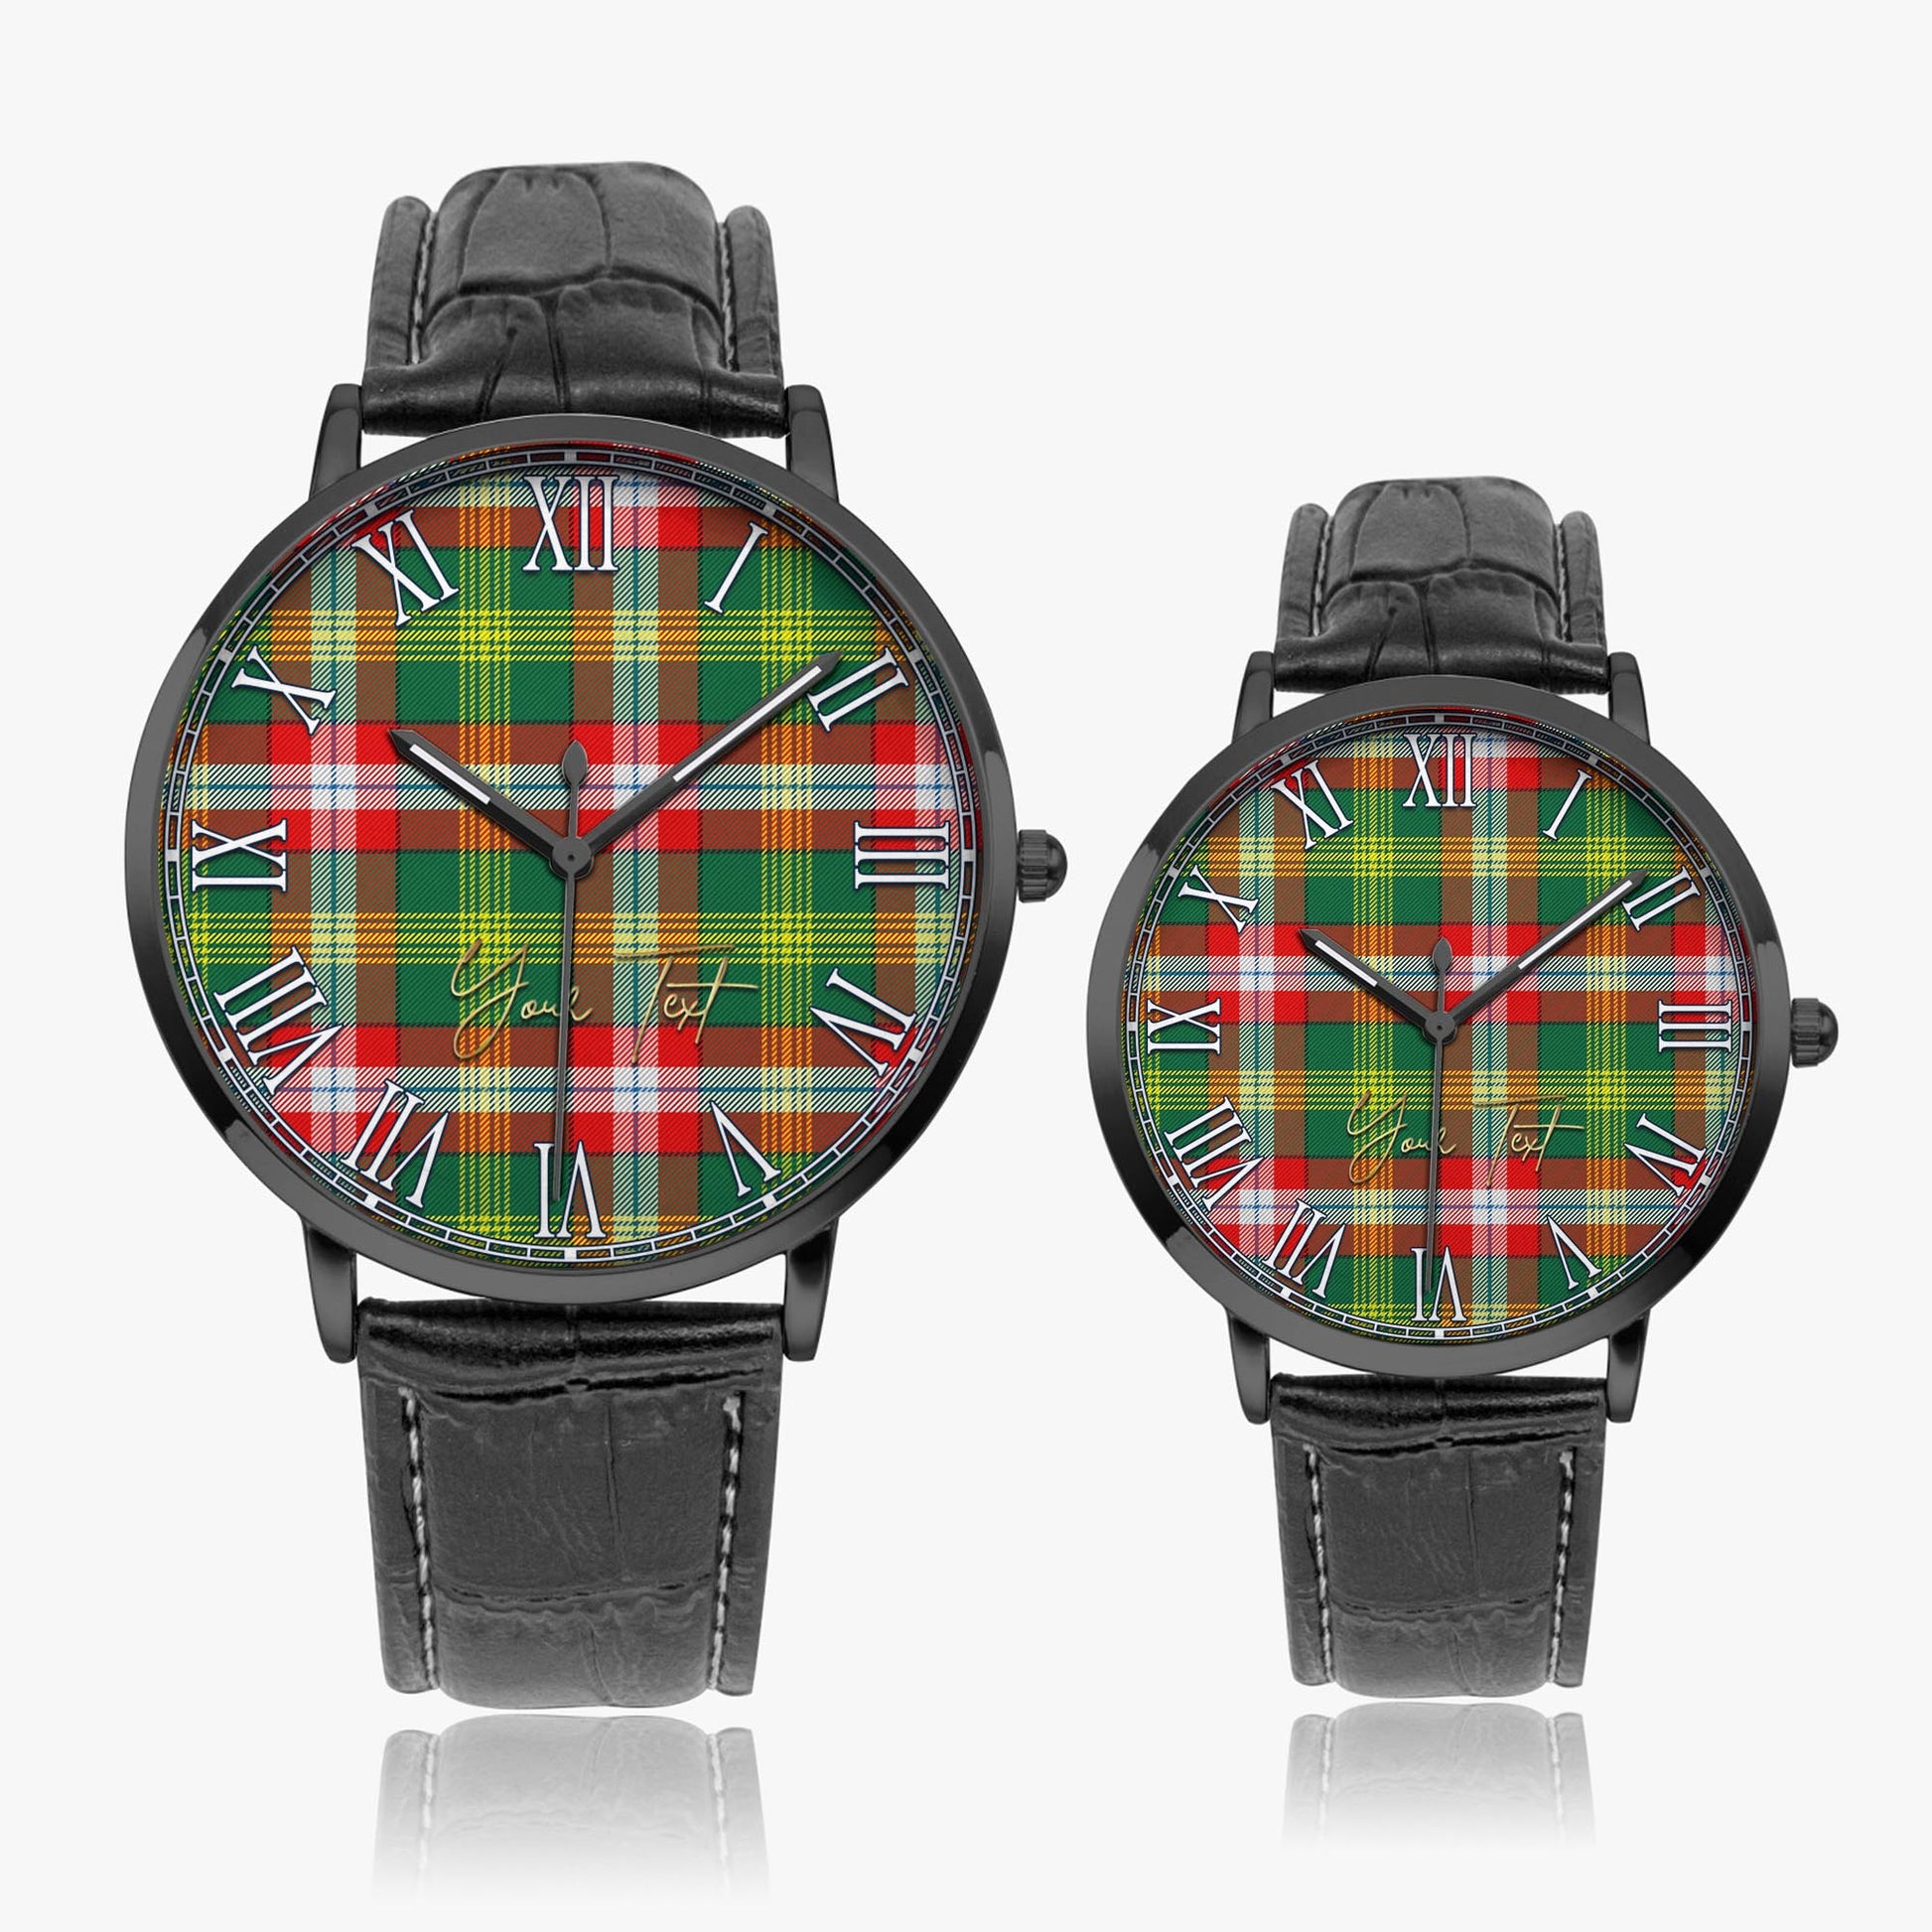 Northwest Territories Canada Tartan Personalized Your Text Leather Trap Quartz Watch Ultra Thin Black Case With Black Leather Strap - Tartanvibesclothing